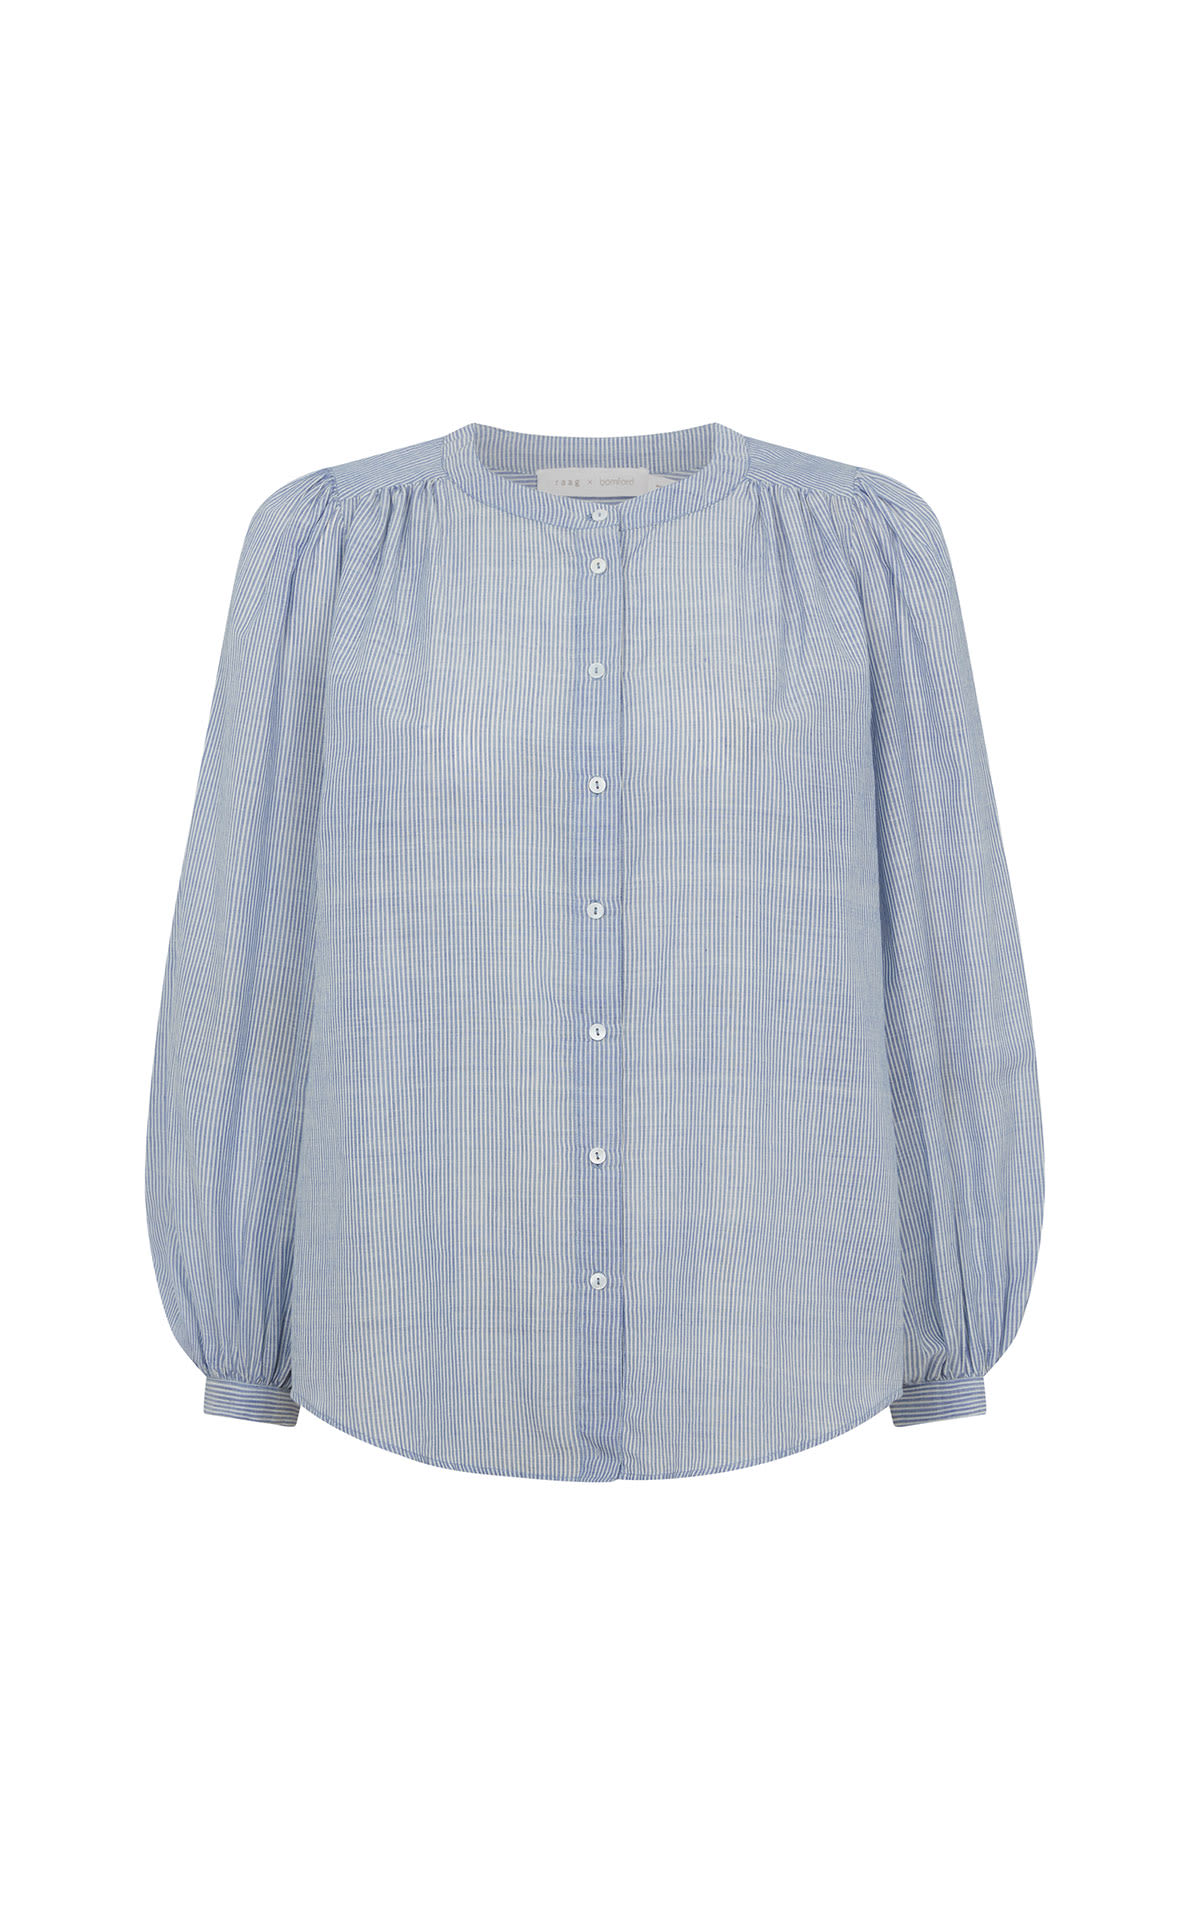 Bamford Una handwoven blouse ocean from Bicester Village